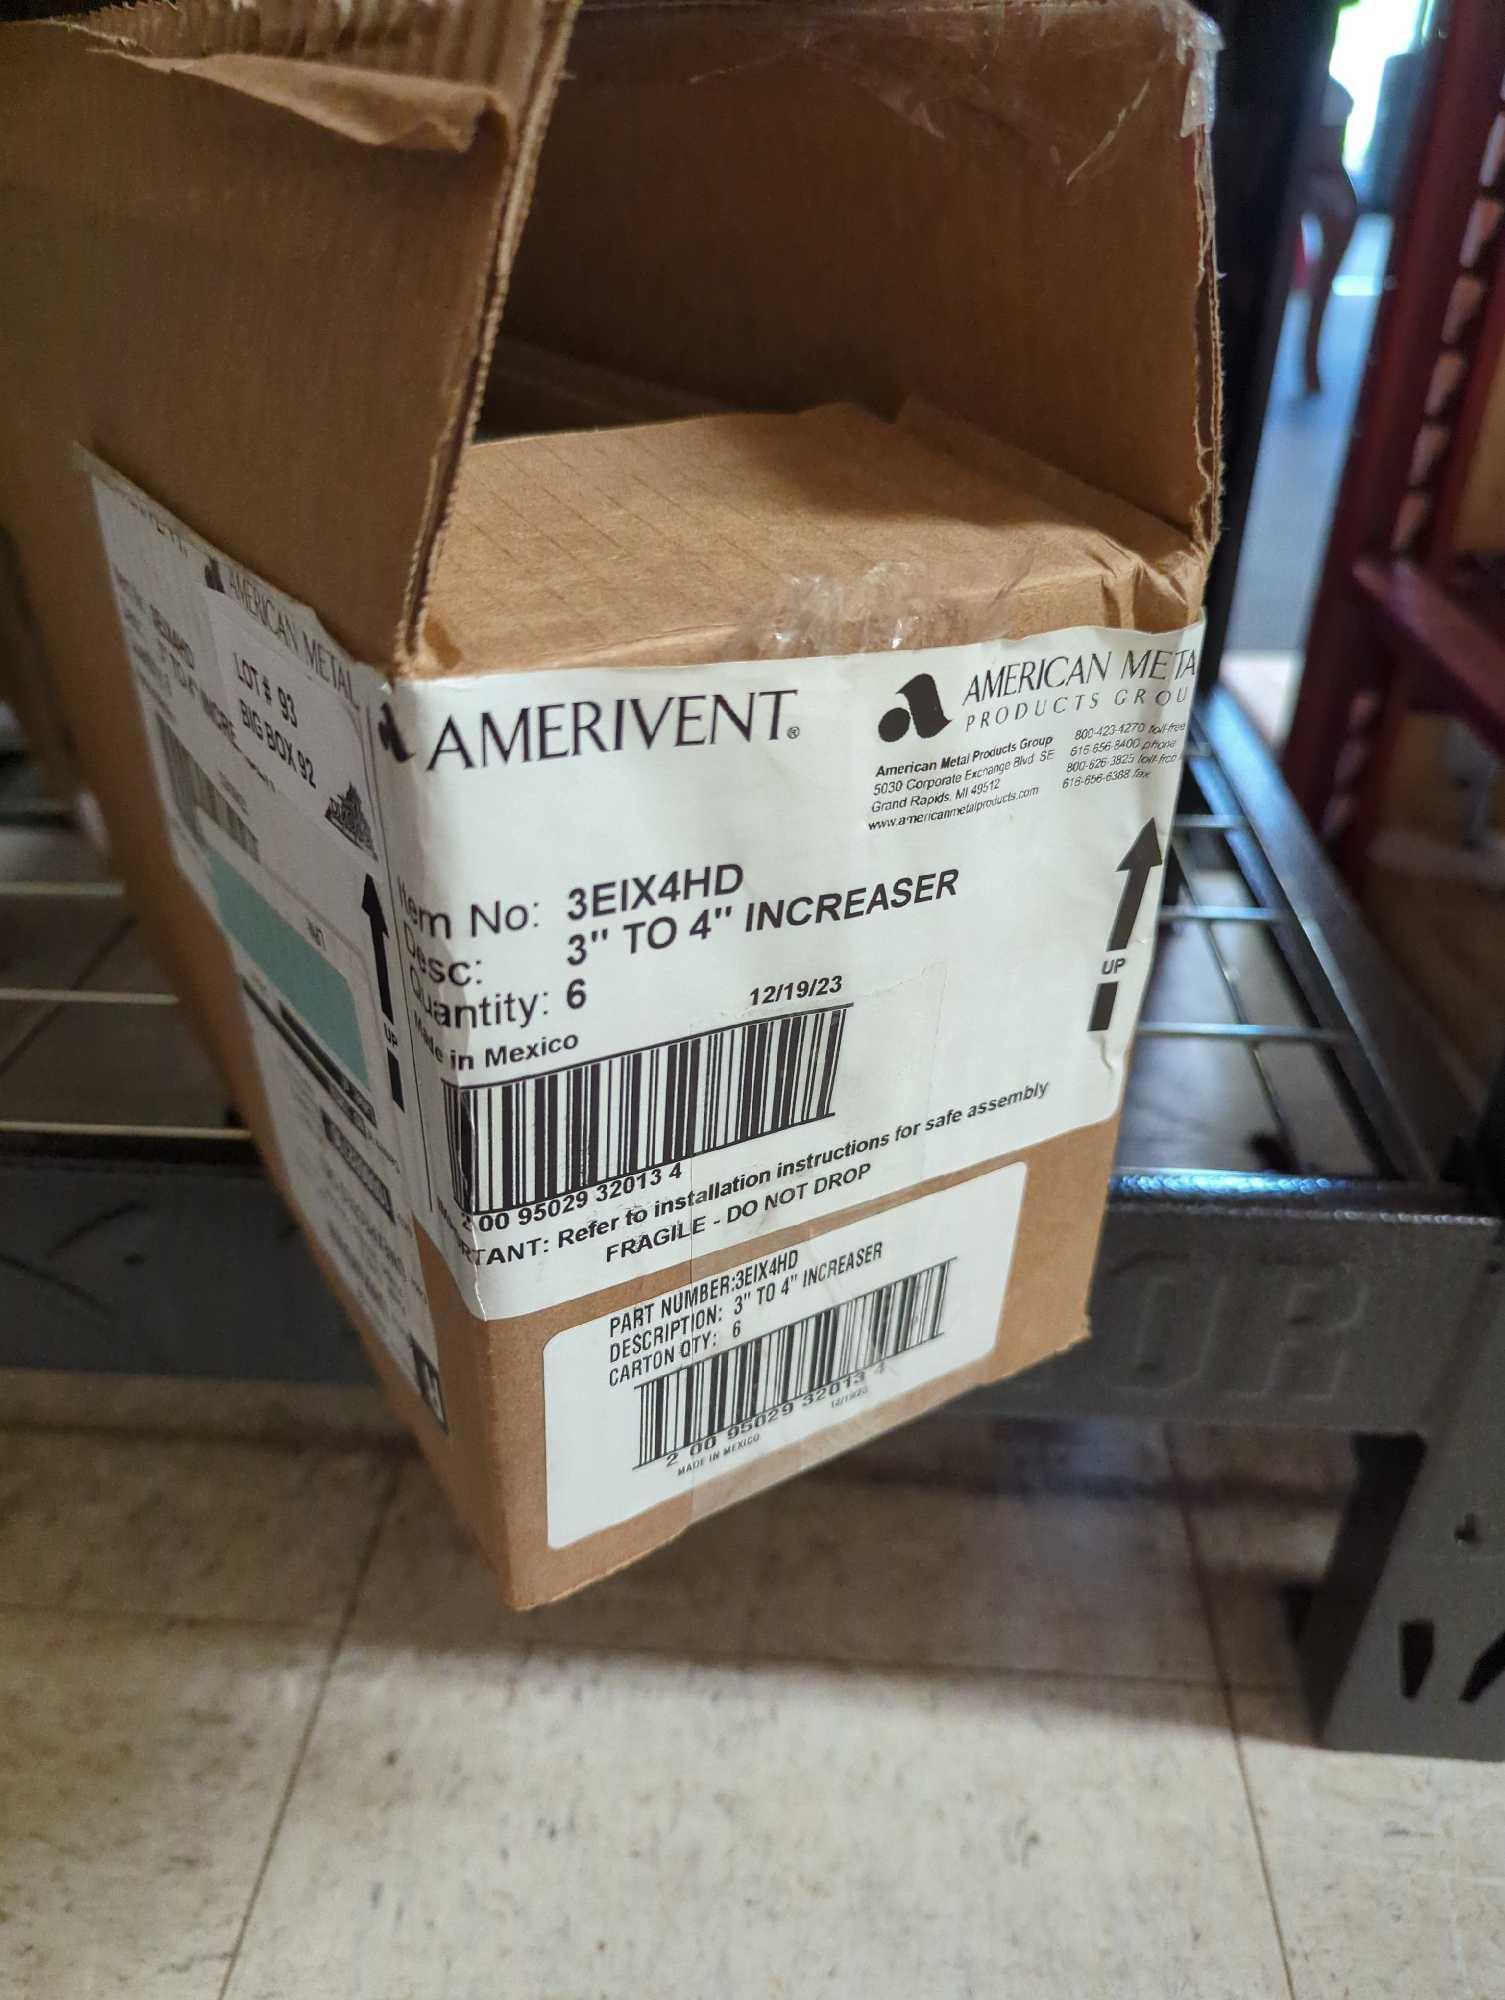 Lot of 3 Boxes of Amerivent to include, 4 inch Single Wall Appliance Metal Quantity 6, 4 Inch 45